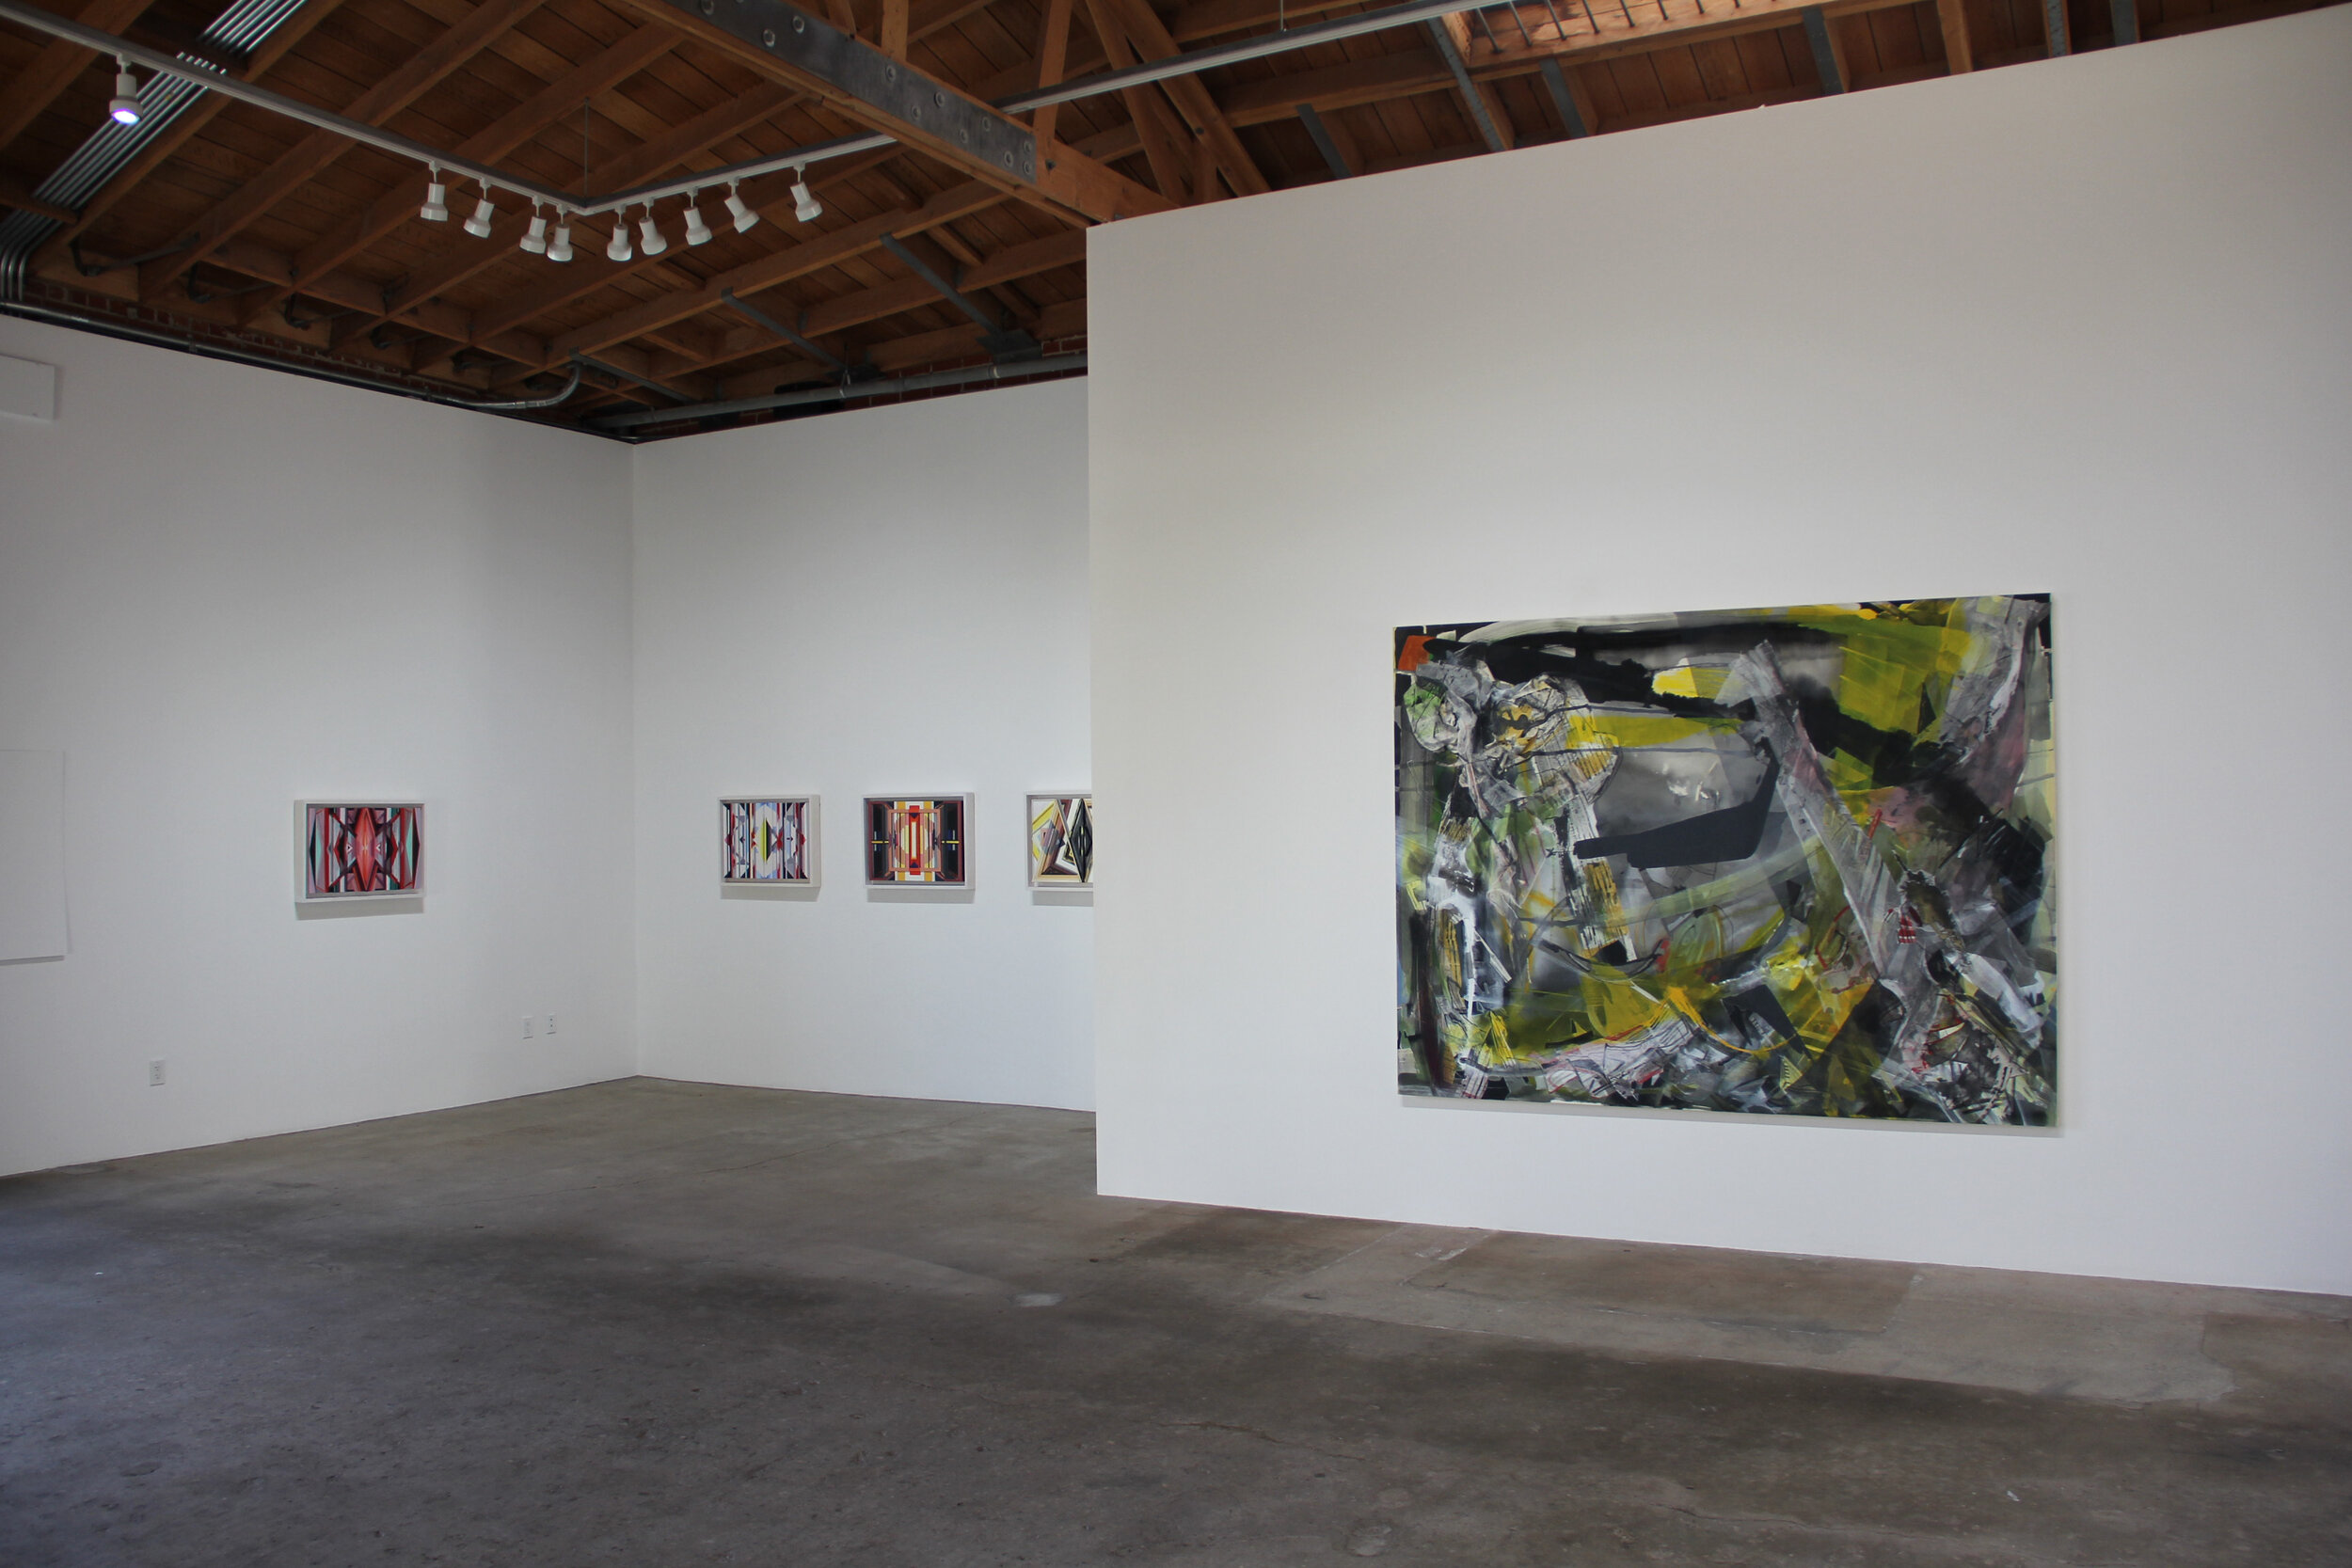   Shift , a group show featuring Karen Carson, Kim Dingle, Iva Gueorguieva, Elisa Johns, also opened at Denk gallery the same evening as  Big House.    